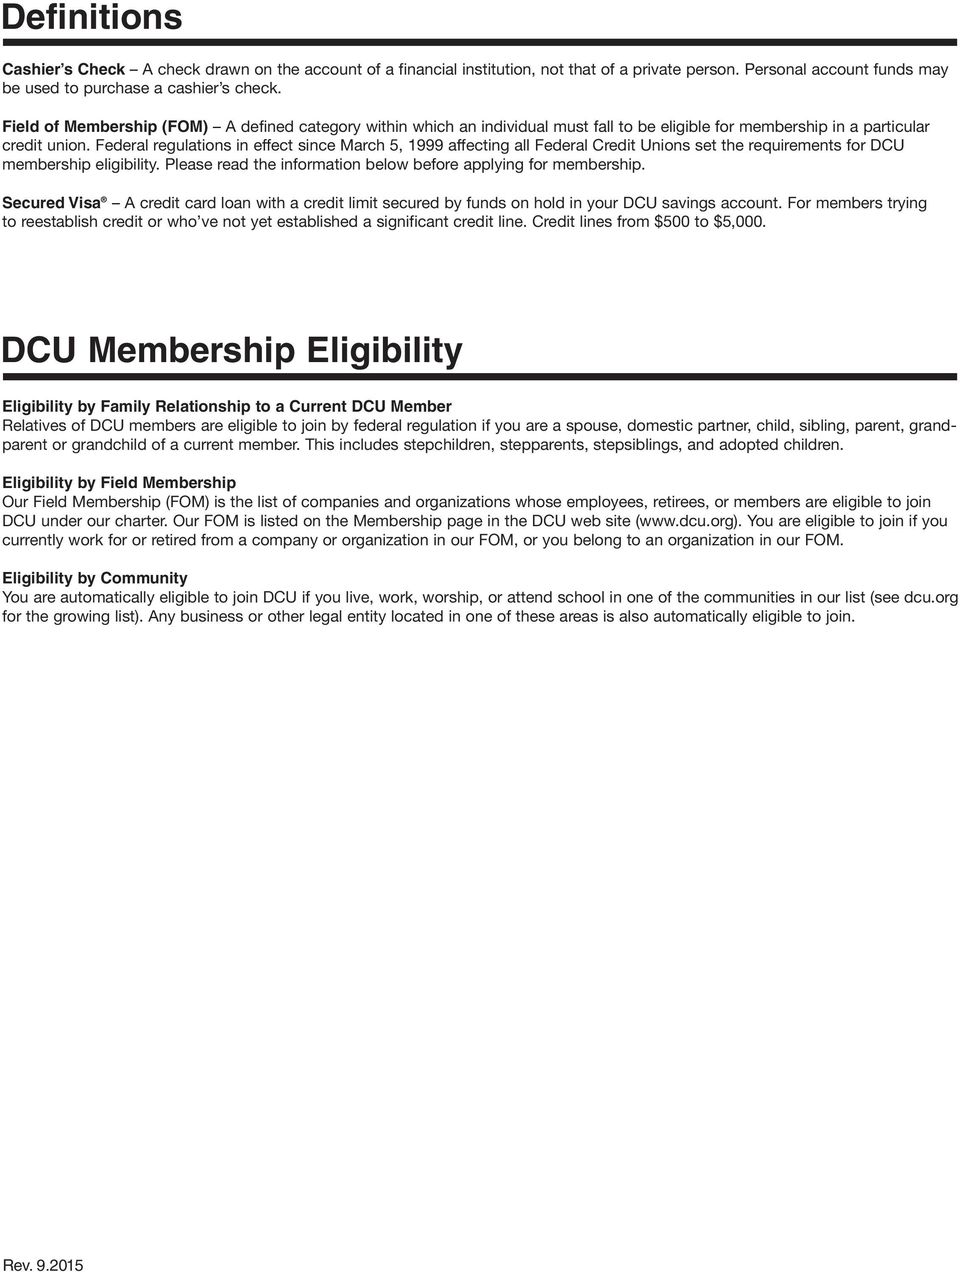 Federal regulations in effect since March 5, 1999 affecting all Federal Credit Unions set the requirements for DCU membership eligibility.